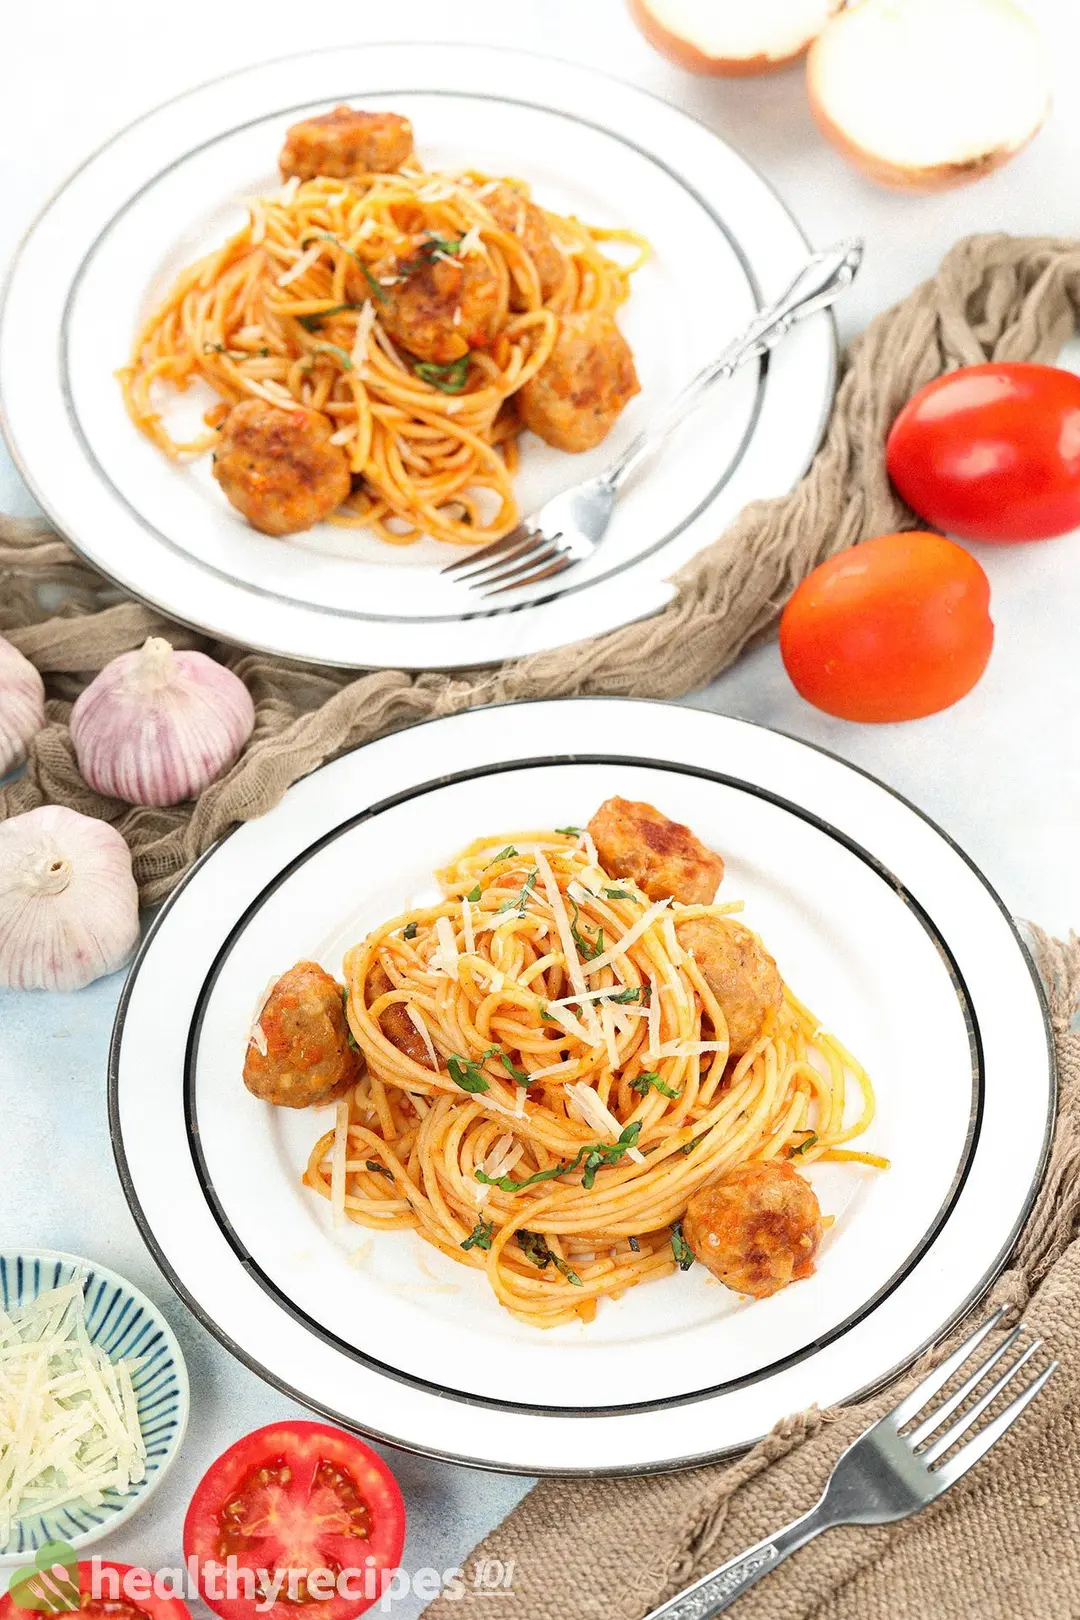 Two plates of chicken meatballs with spaghetti decorated with utensils